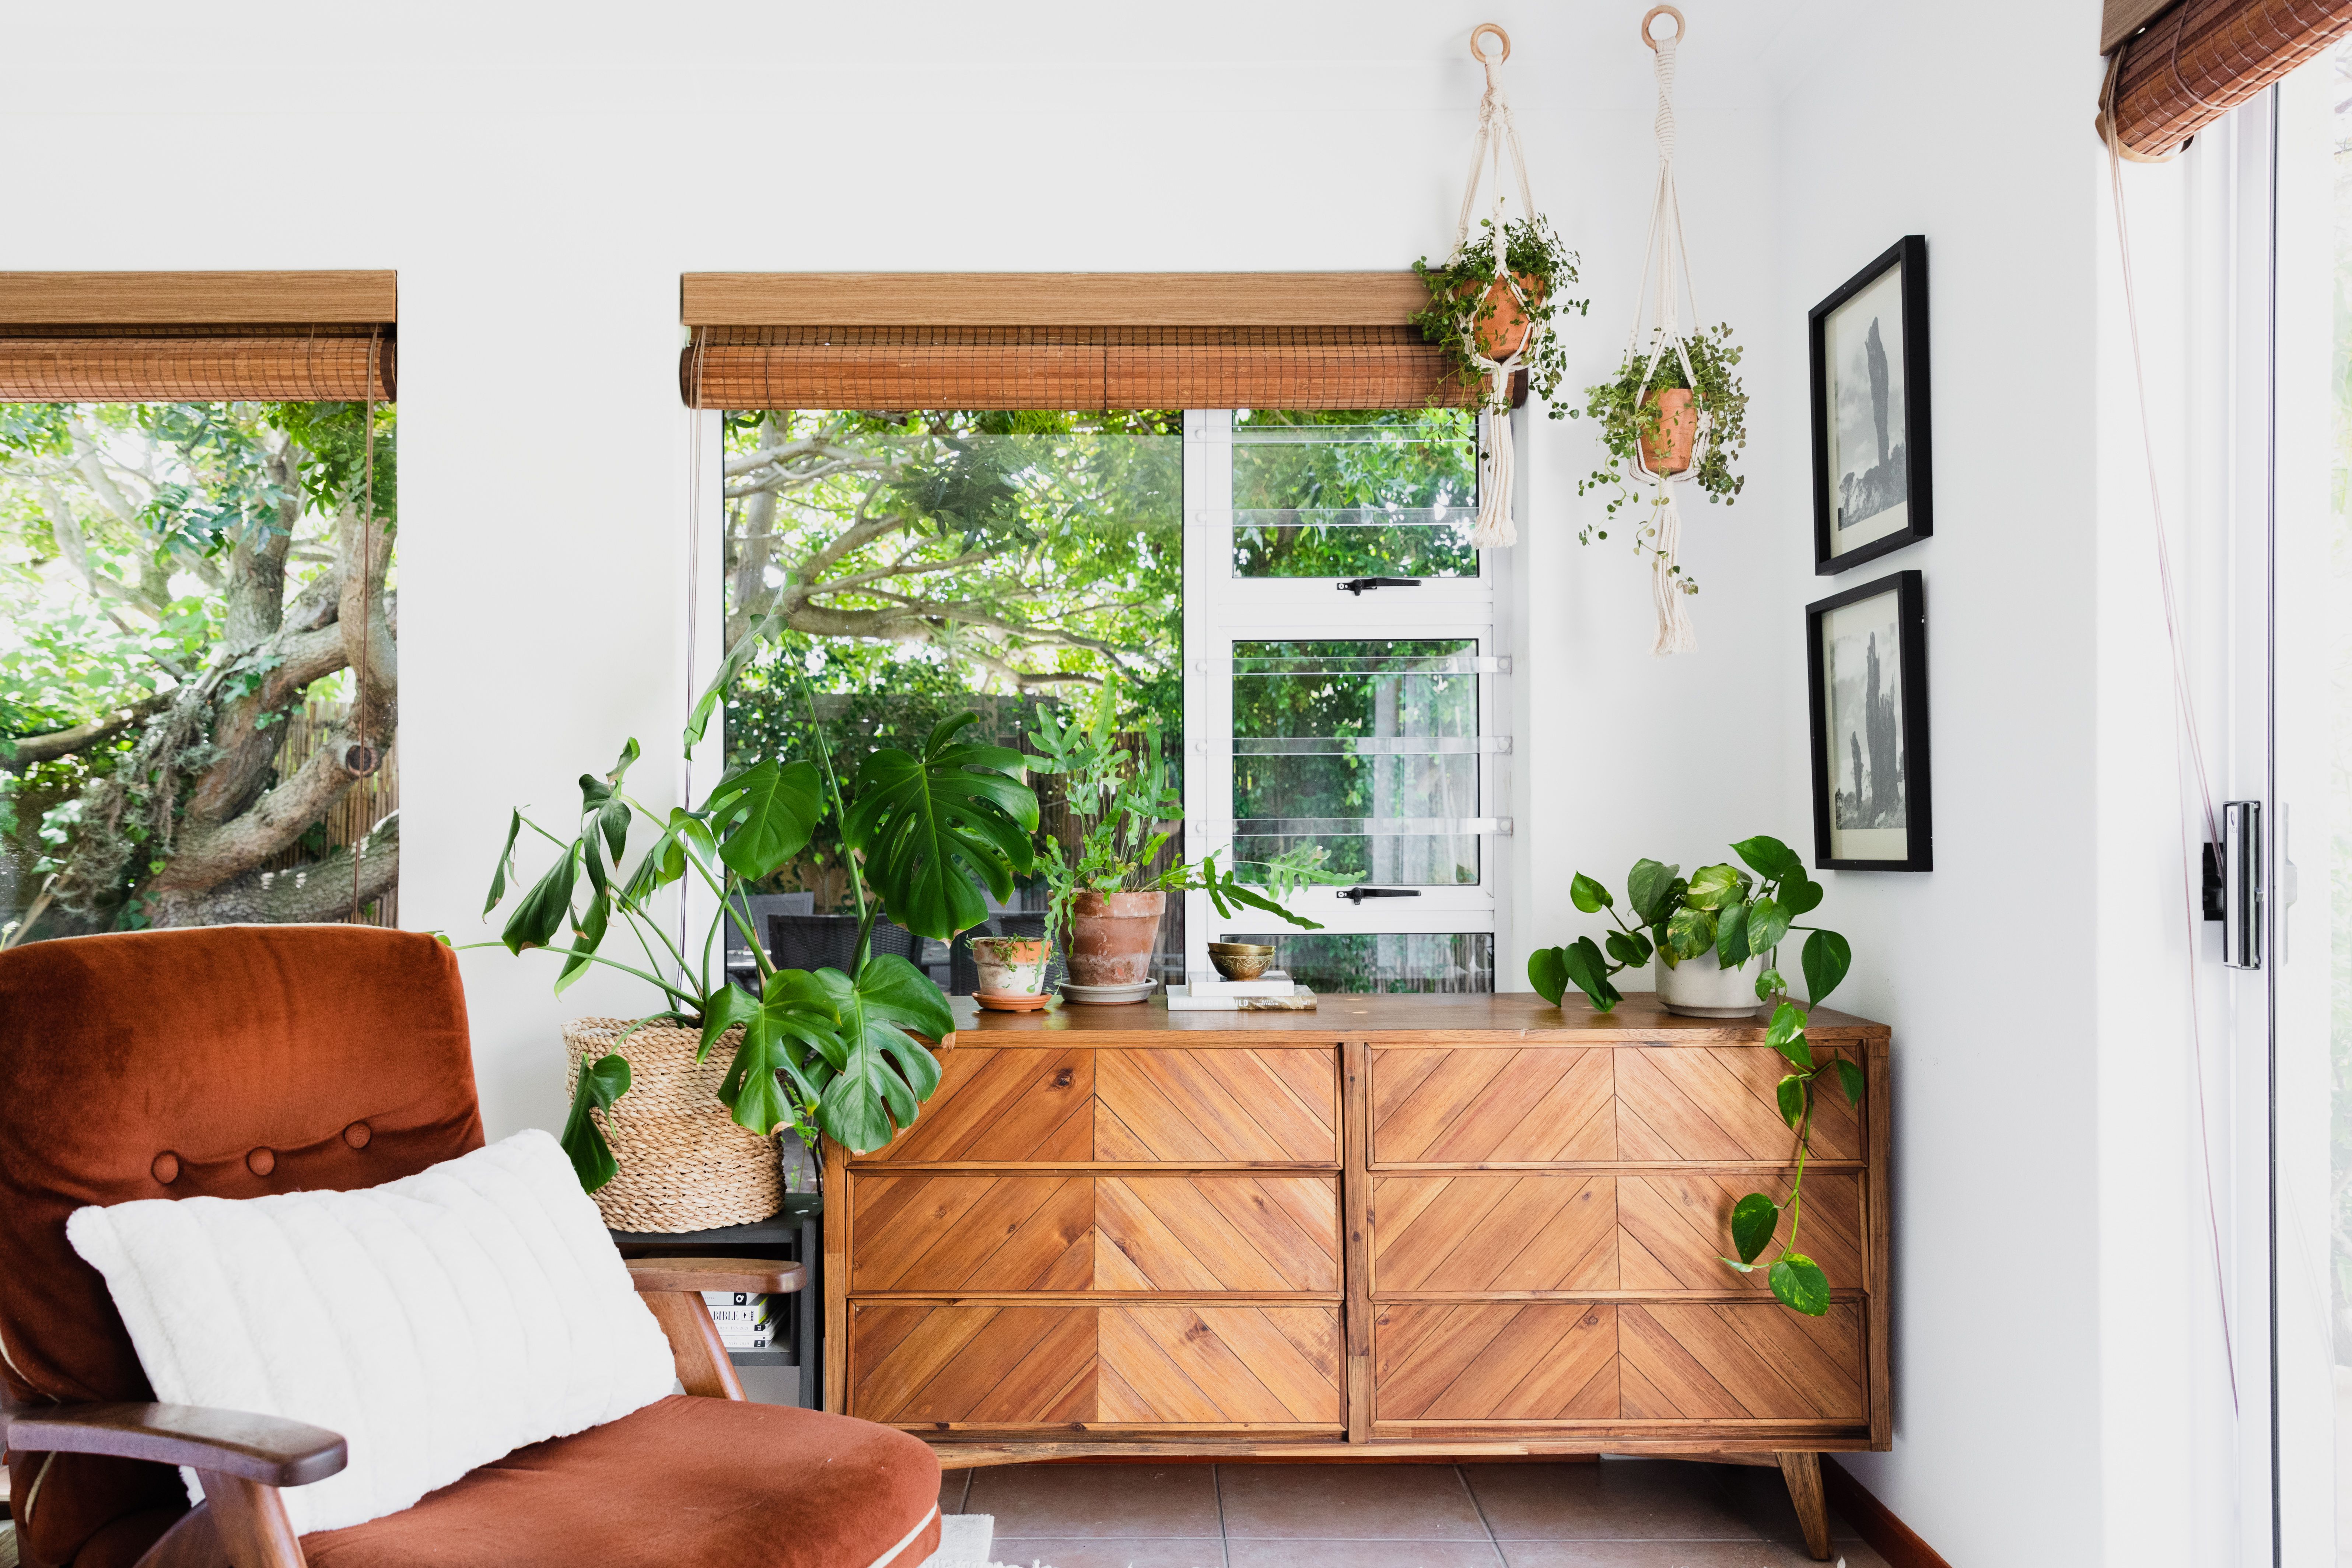 26 Clever Ideas for Decorating With Greenery